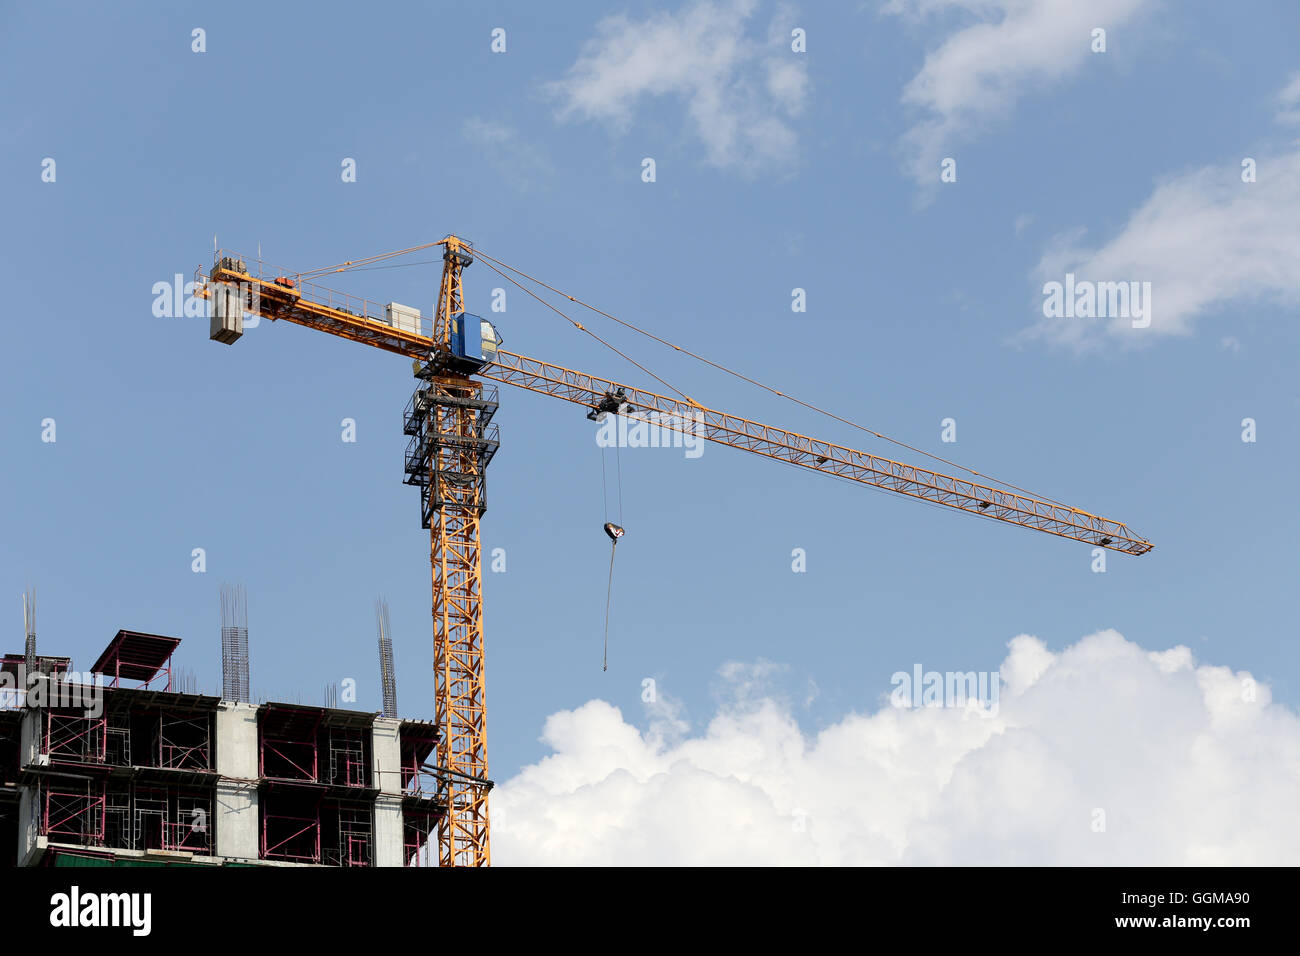 Crane working on a building under construction in day time and blue sky background. Stock Photo